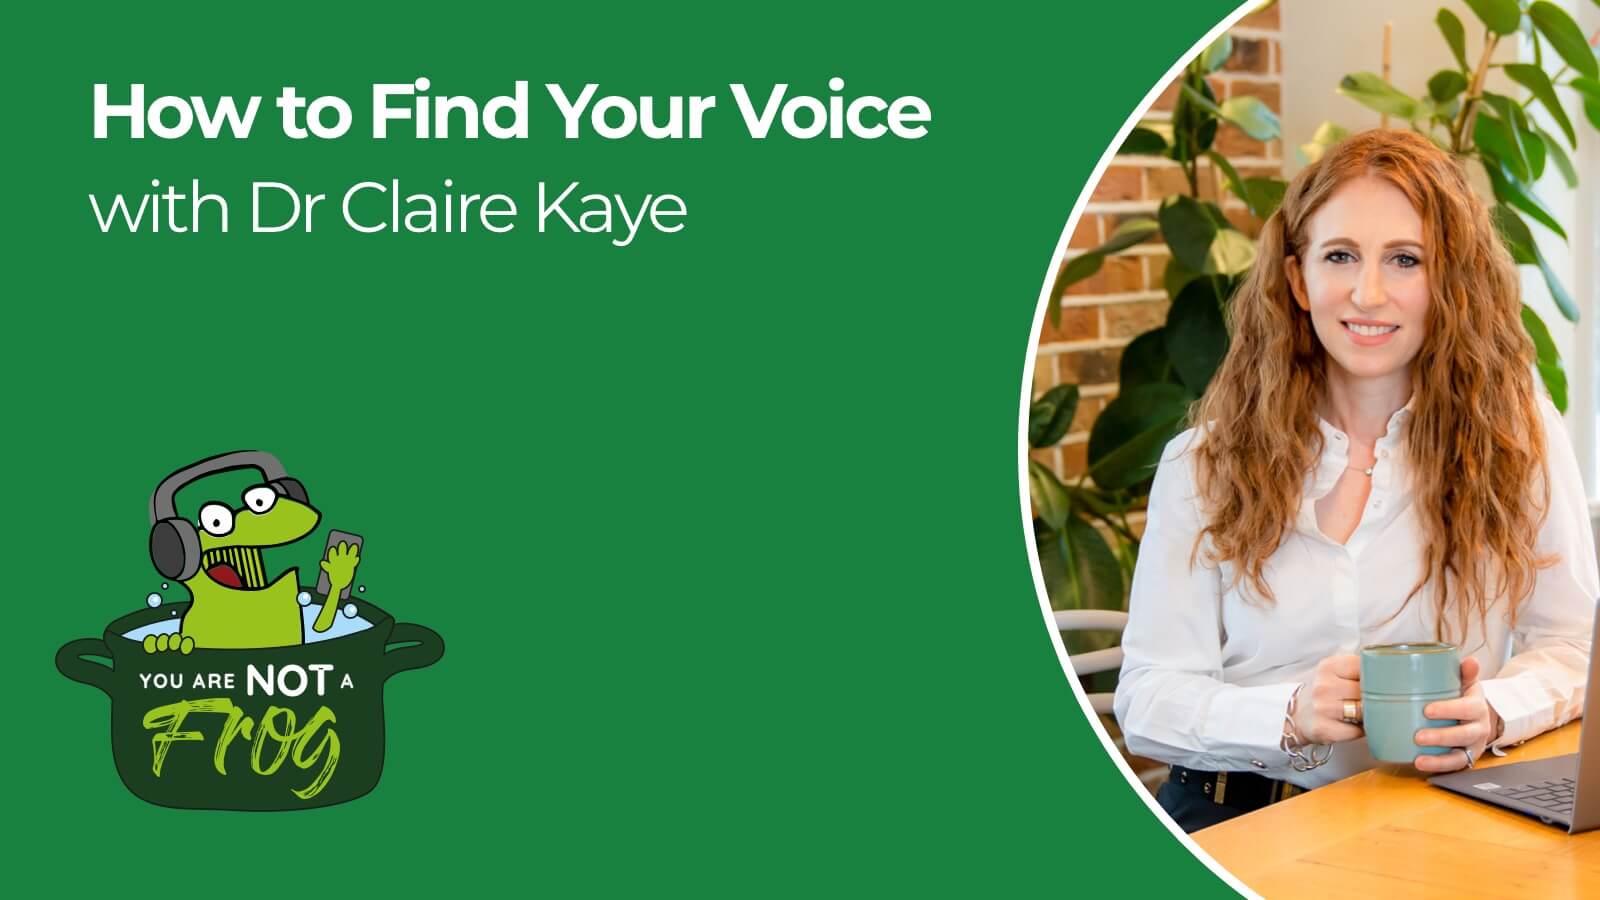 How to Find Your Voice